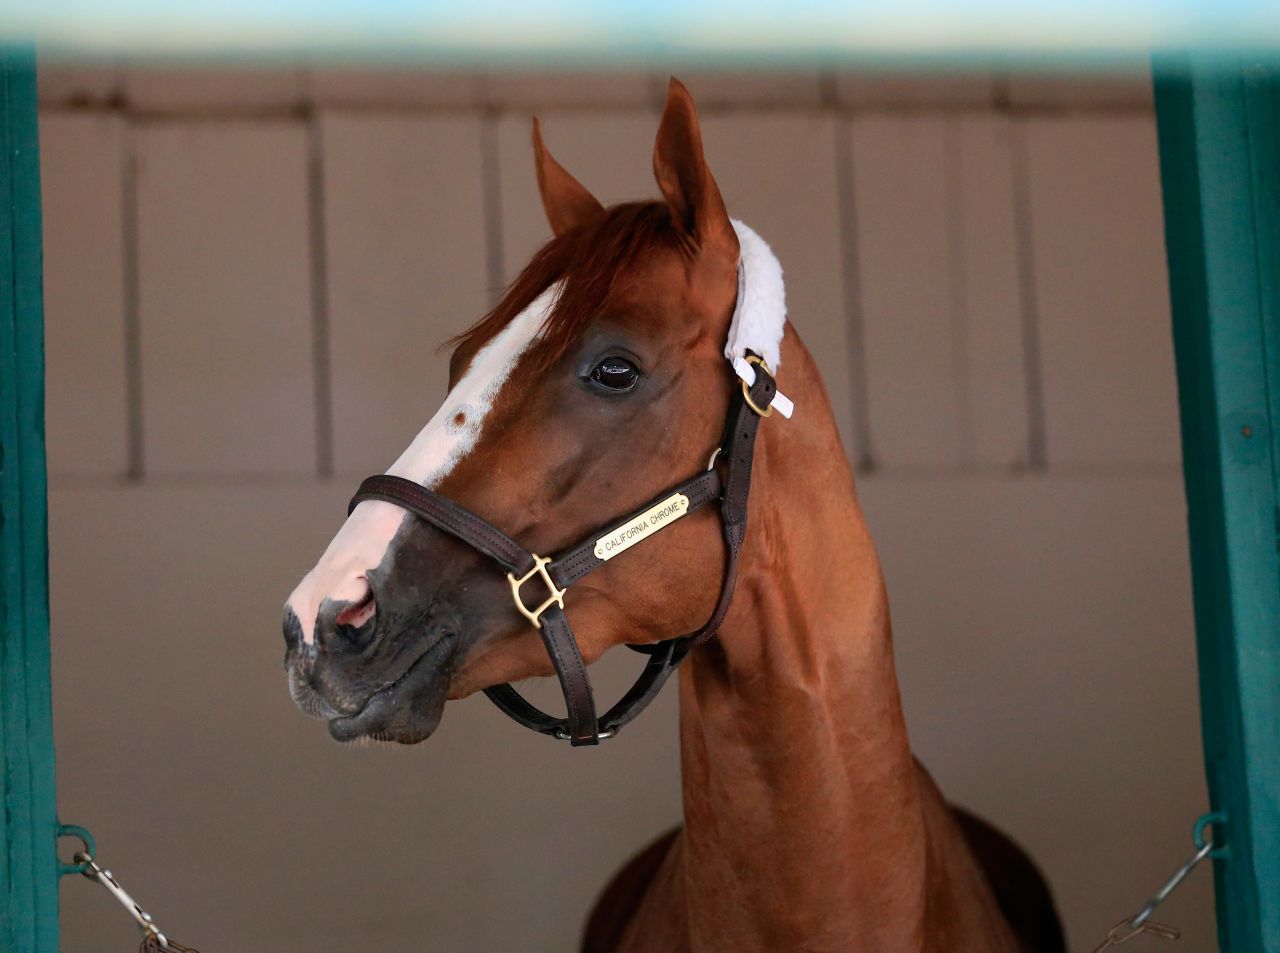 Last year California Chrome won the Preakness Stakes, but the horse's bid to win the Triple Crown came unstuck in the Belmont Stakes.